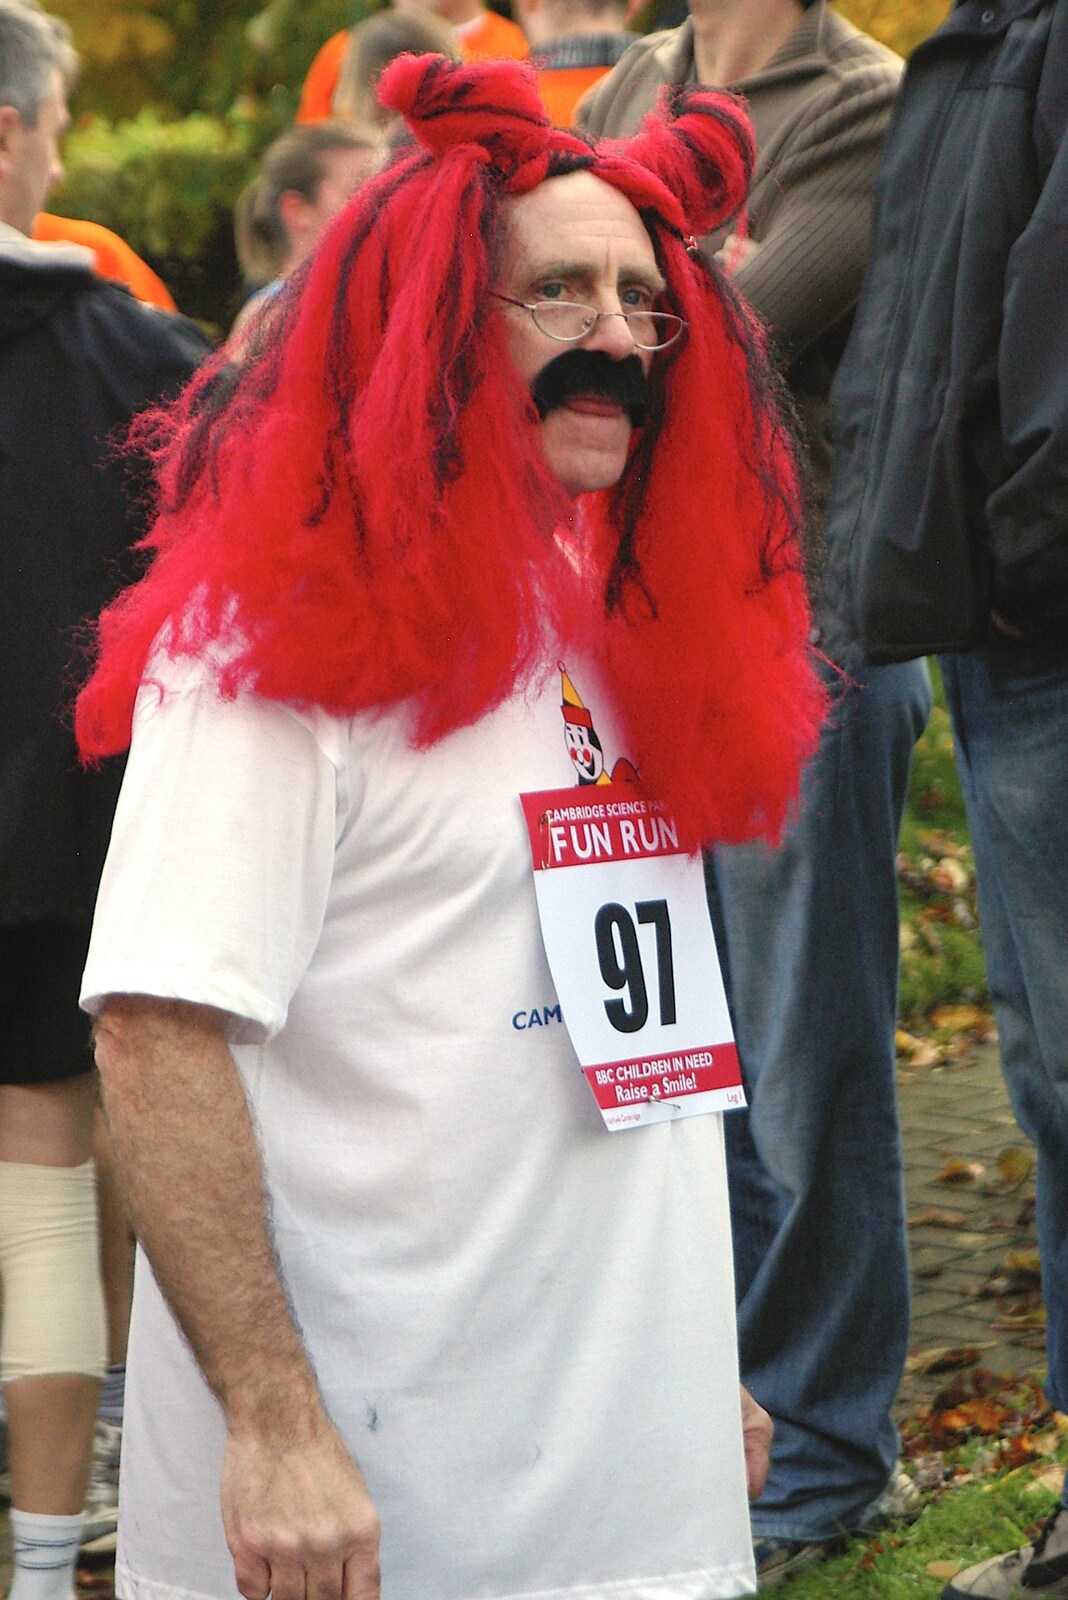 A Robert Winston look-alike in a bright red wig from Cambridge Science Park "Children in Need" Fun Run, Milton Road, Cambridge - 17th November 2006